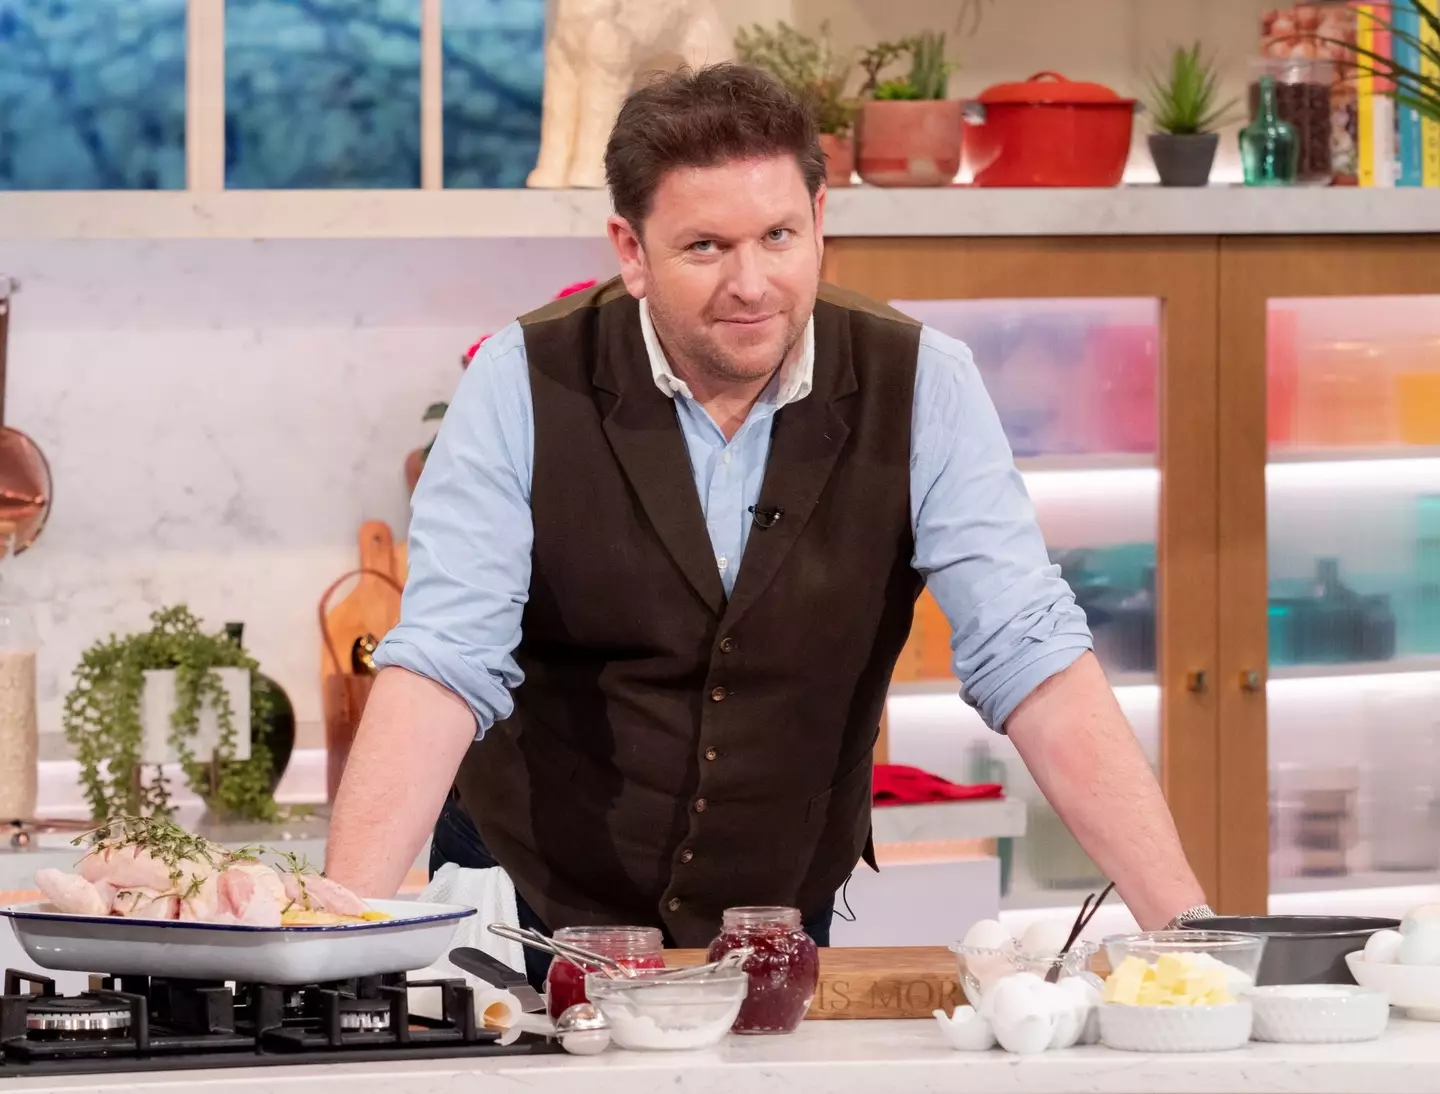 TV chef James Martin says his house was broken into by ‘masked men’.